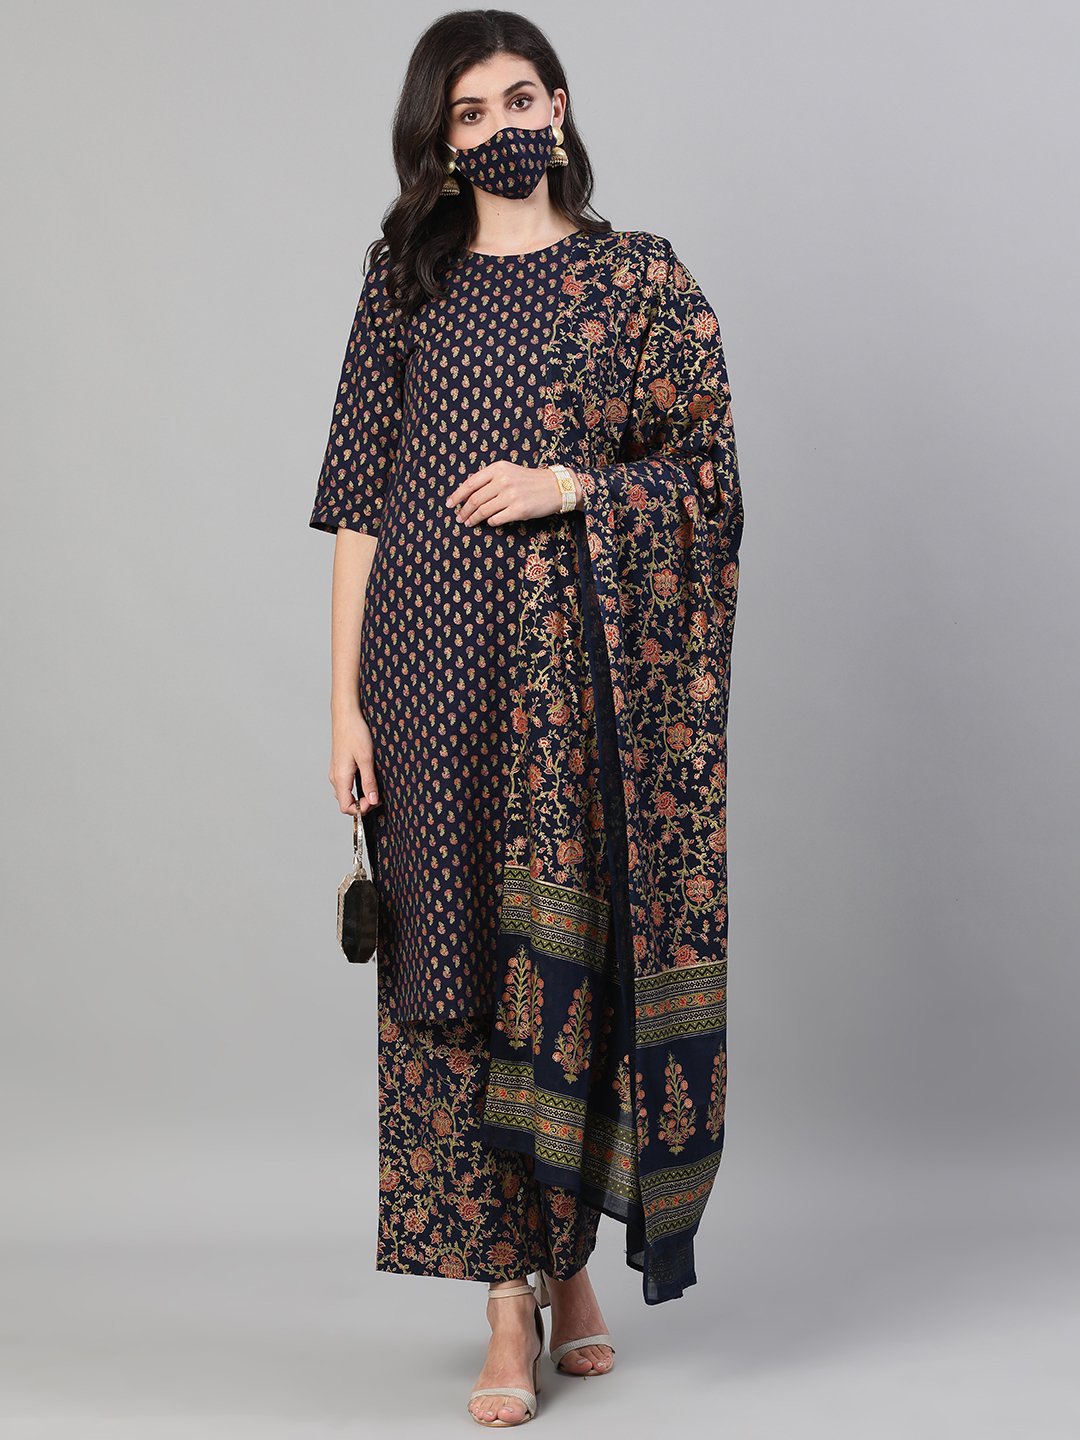 Women's Blue And Orange Gold Printed Three-Quarter Sleeves Straight Kurta With Palazzo And Dupatta With Pockets And Face Mask - Nayo Clothing